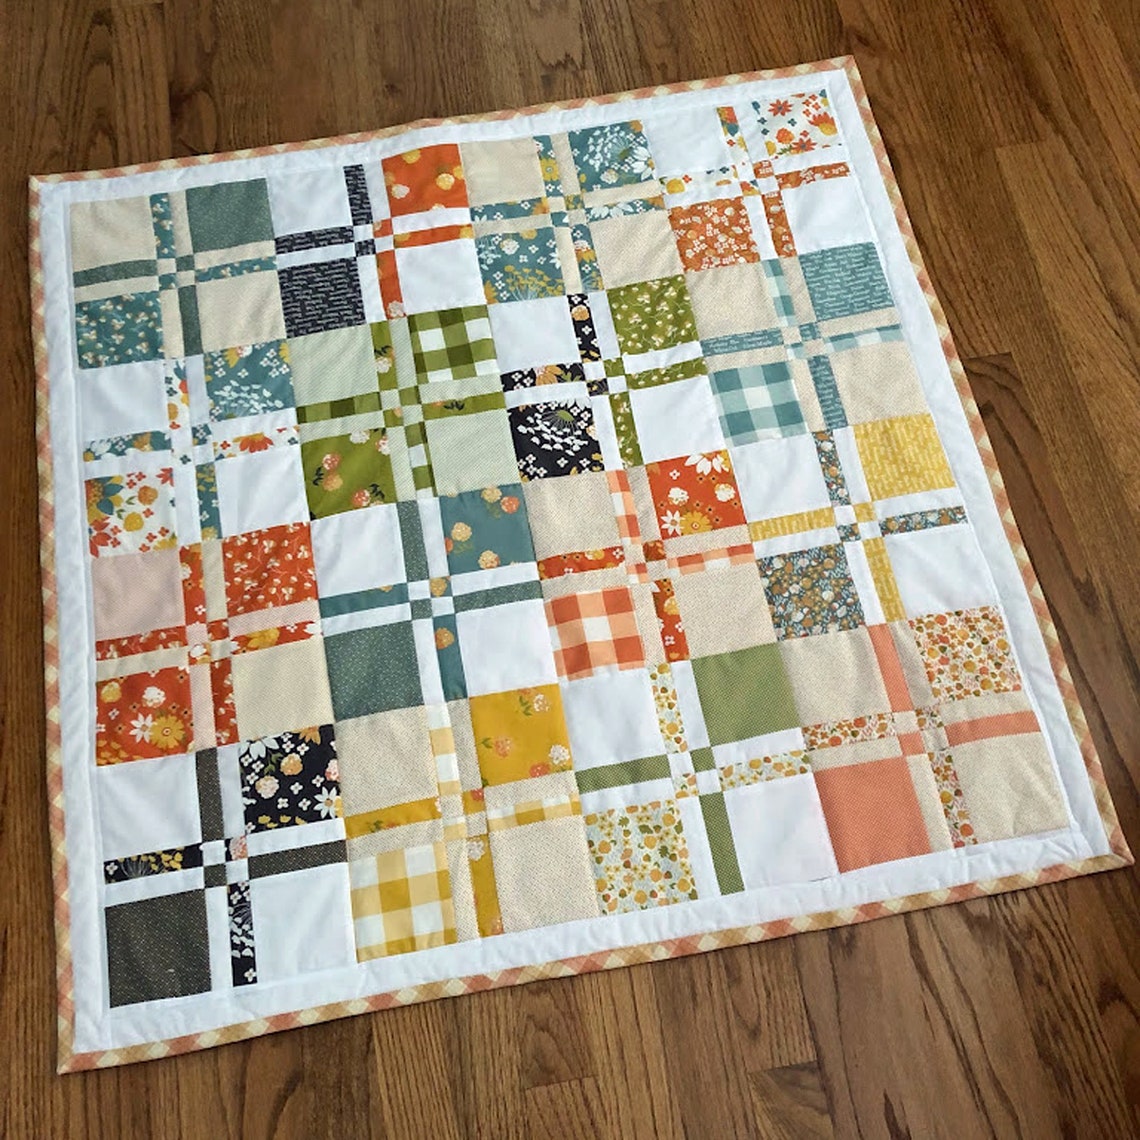 Handmade Baby Quilt Disappearing 4 Patch Stroller Blanket | Etsy